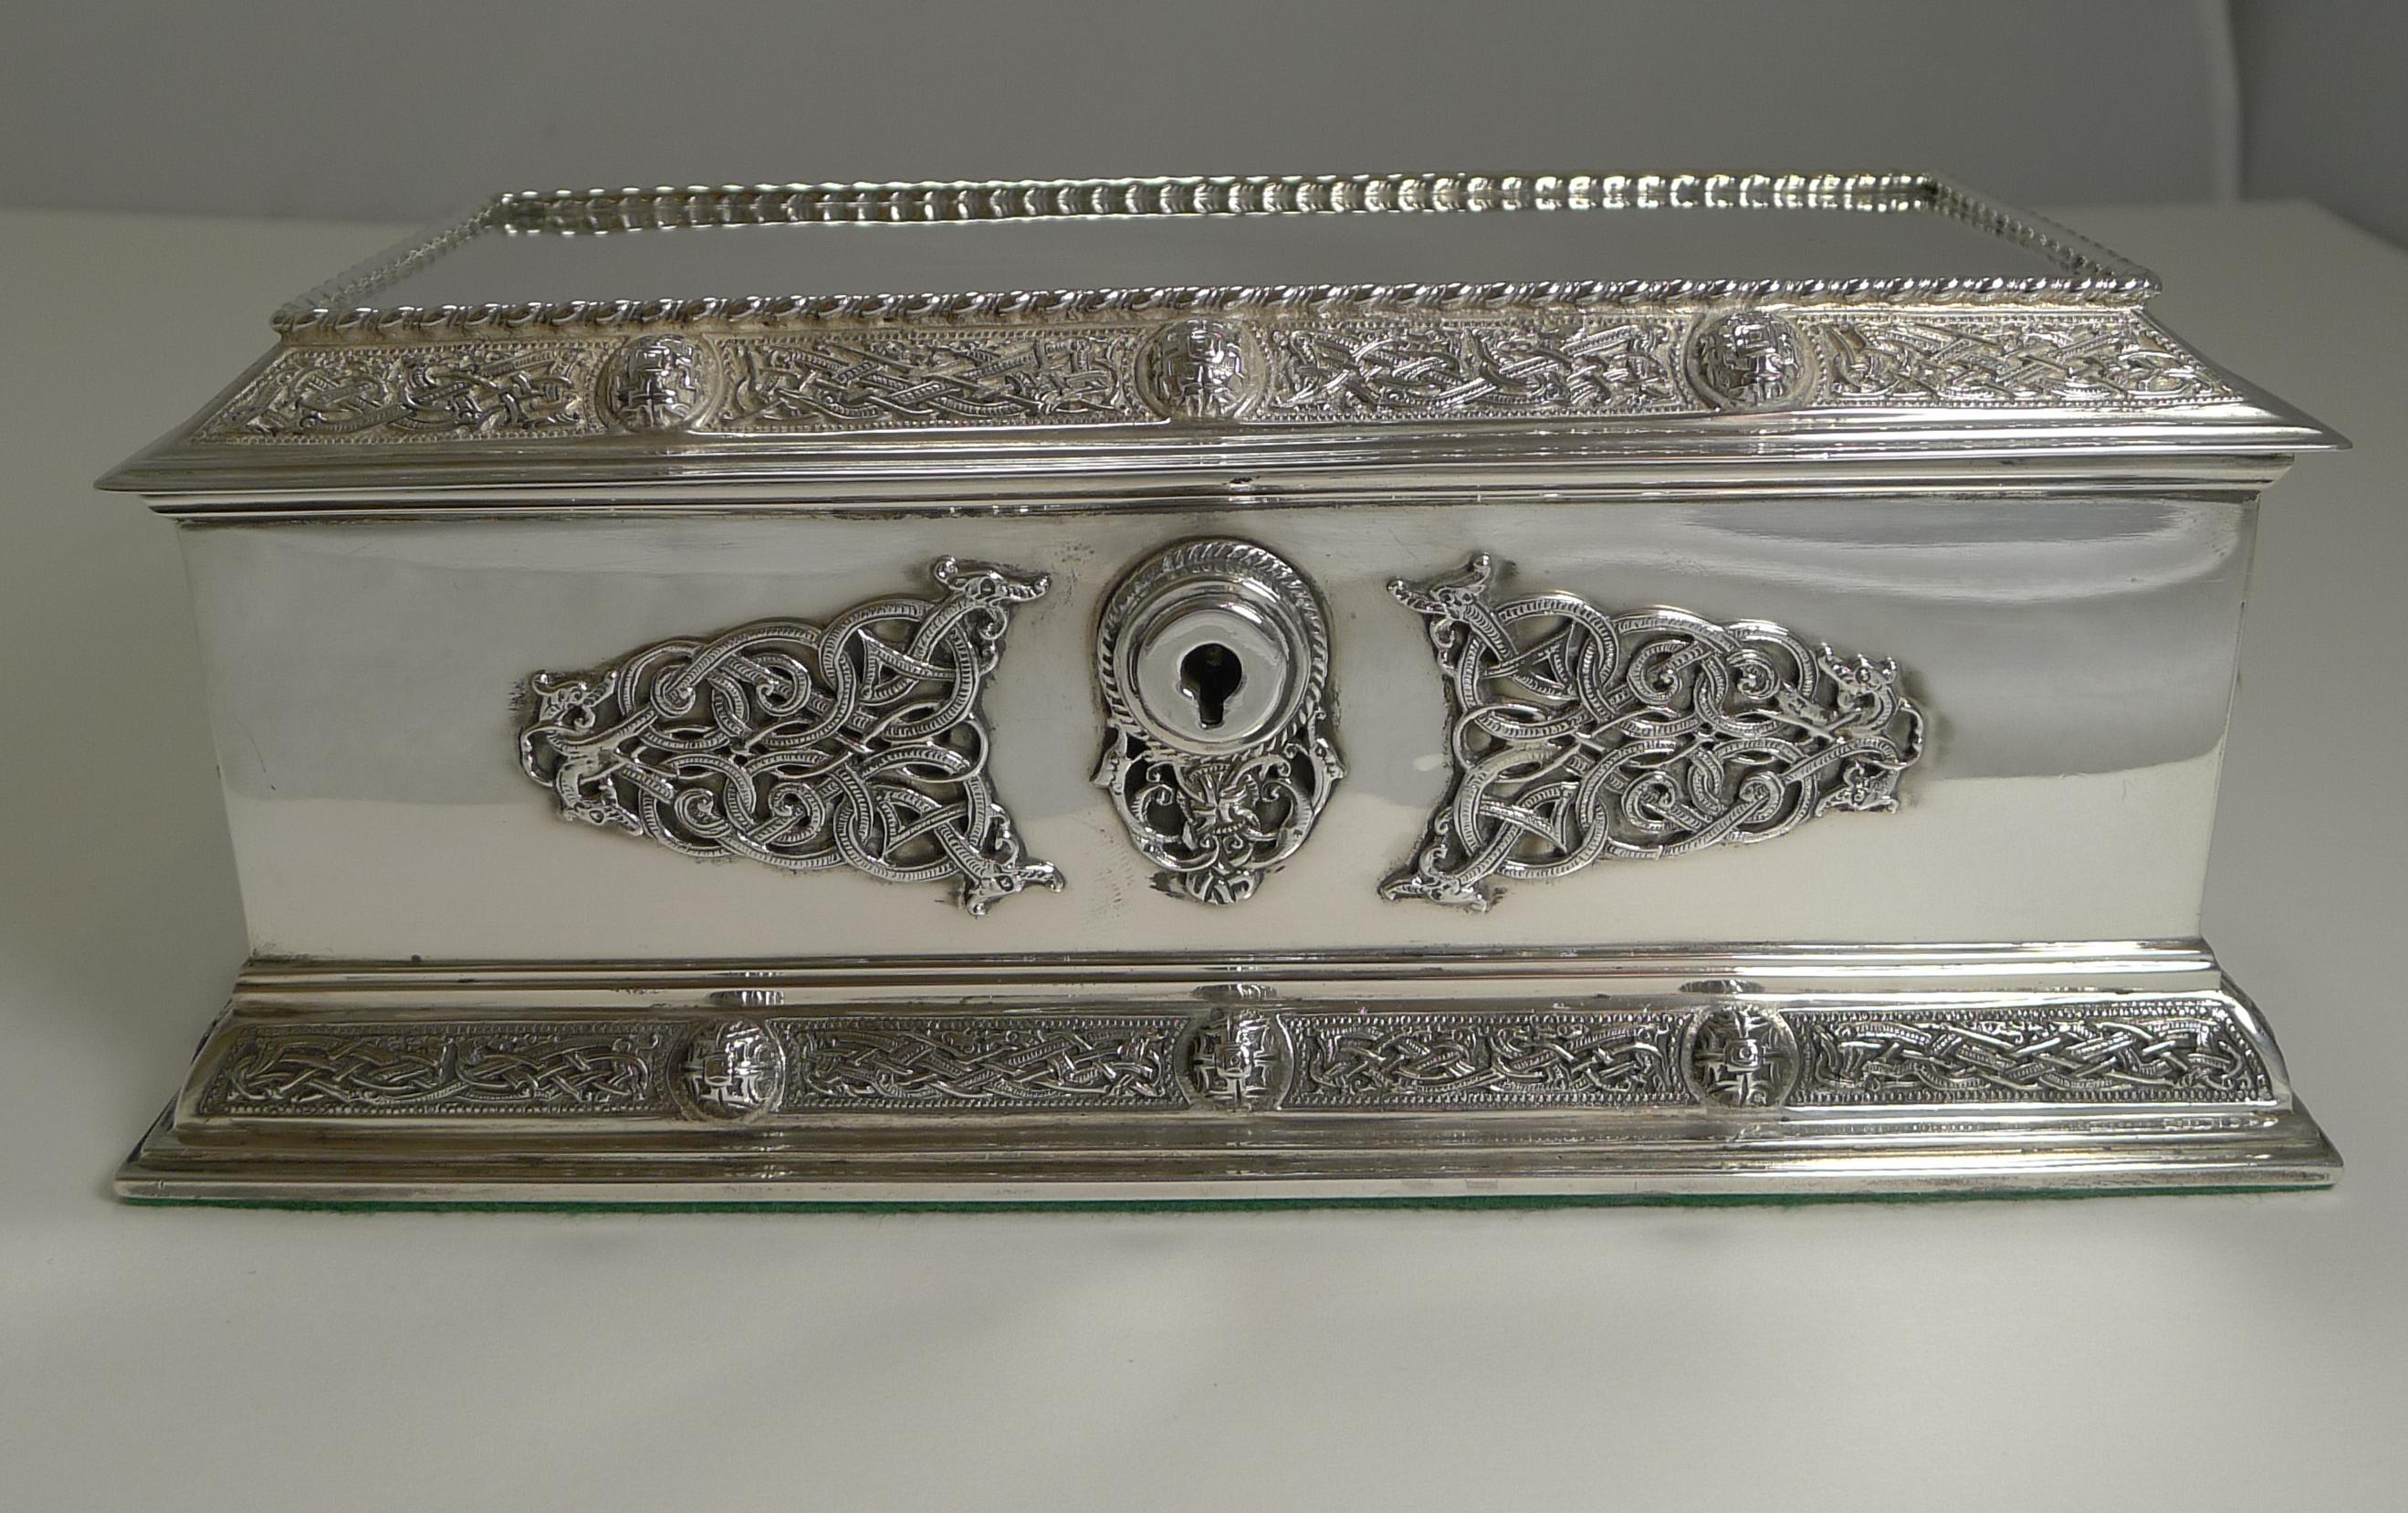 A truly grand and fine quality jewelry box made from English sterling silver with a full hallmark for London 1911. The makers mark is present for the top-notch silversmith, Elkington and Company.

The casket is adorned with the most exquisite and